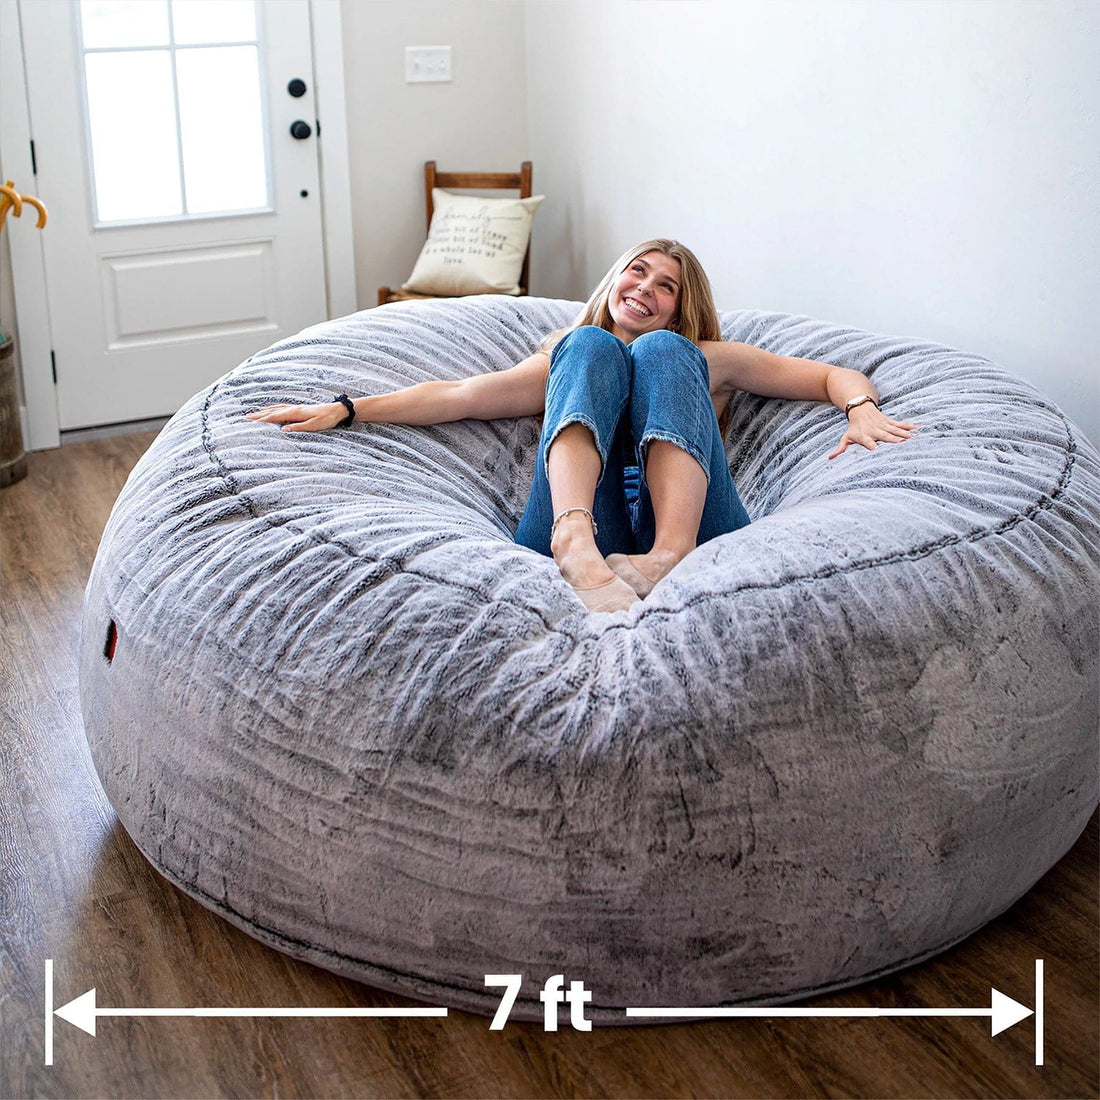 hill Red hostel Huge - Giant Bean Bag Chair - Chinchilla | CordaRoy's Convertible Bean Bags